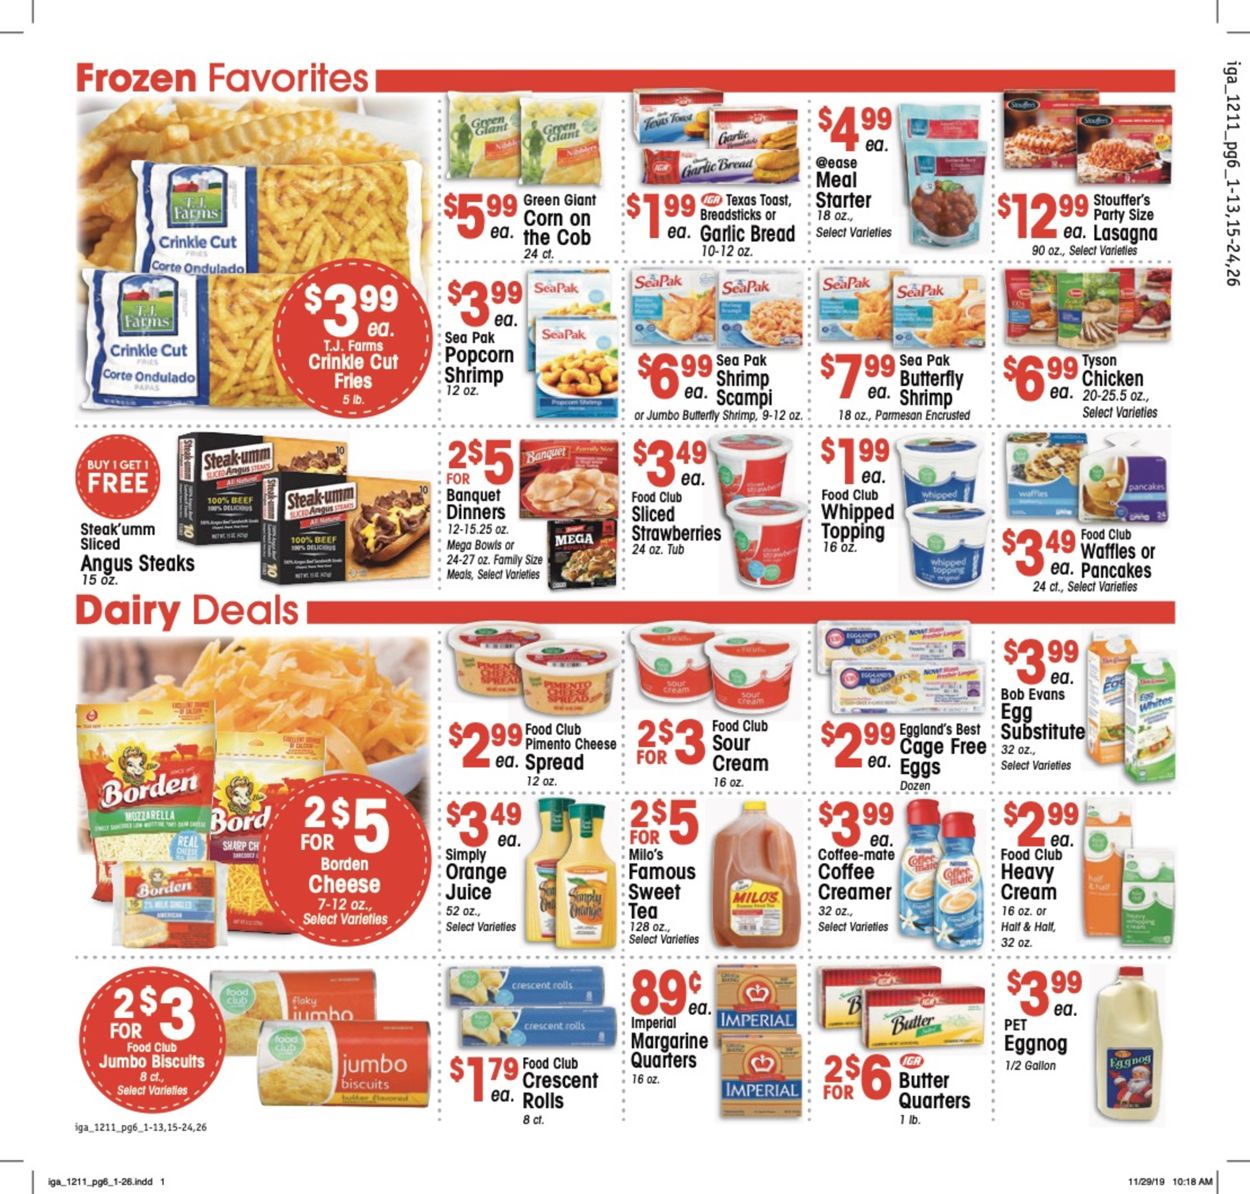 KJ´s Market Current weekly ad 12/11 - 12/17/2019 [6 ...